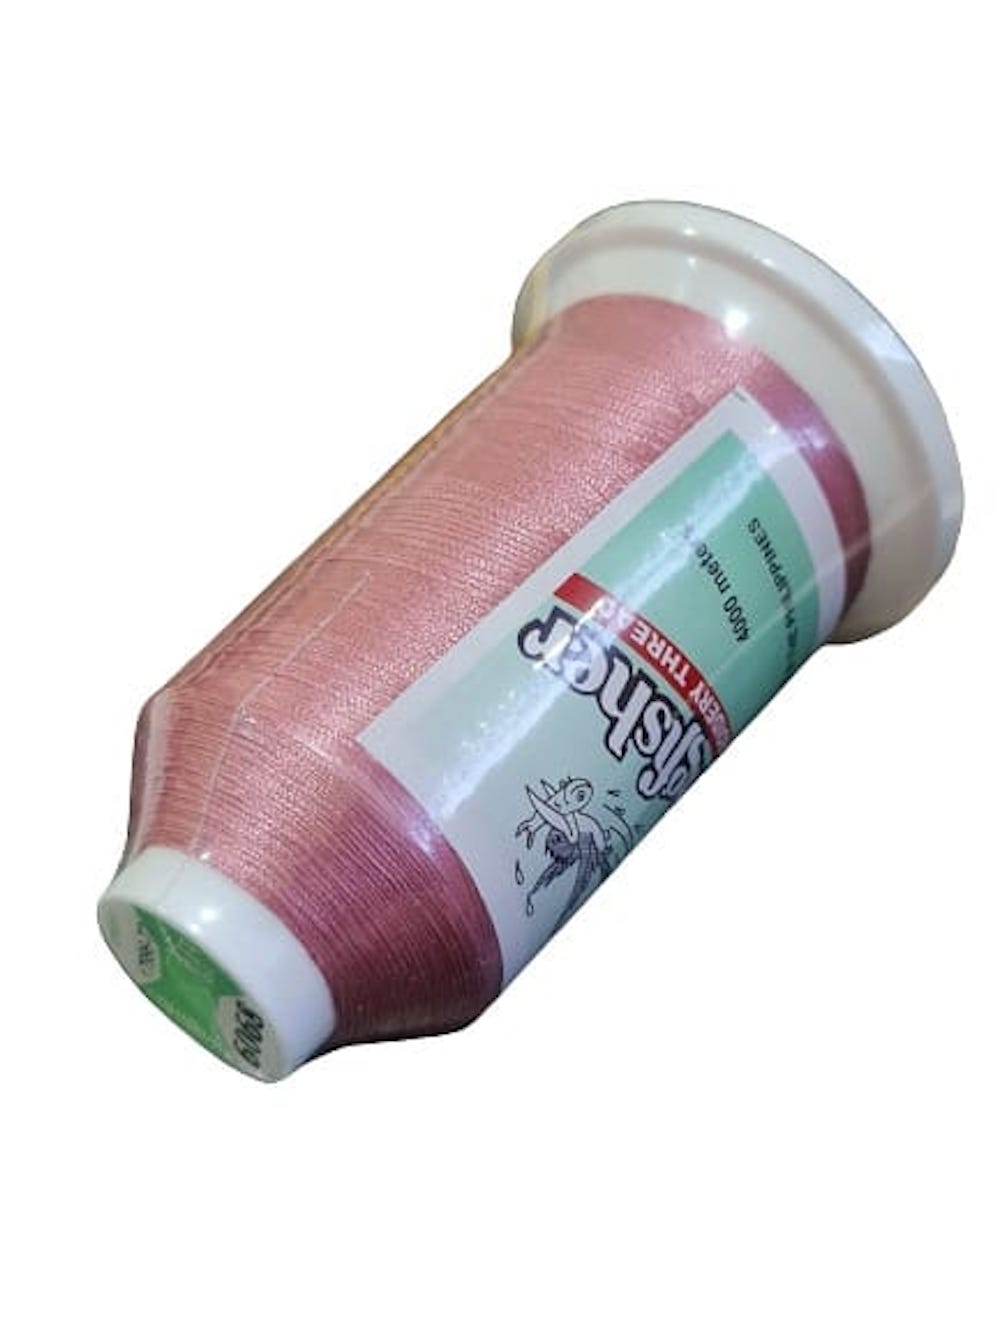 King Fisher Embroidery Thread 4000m 6068 - MY SEWING MALL